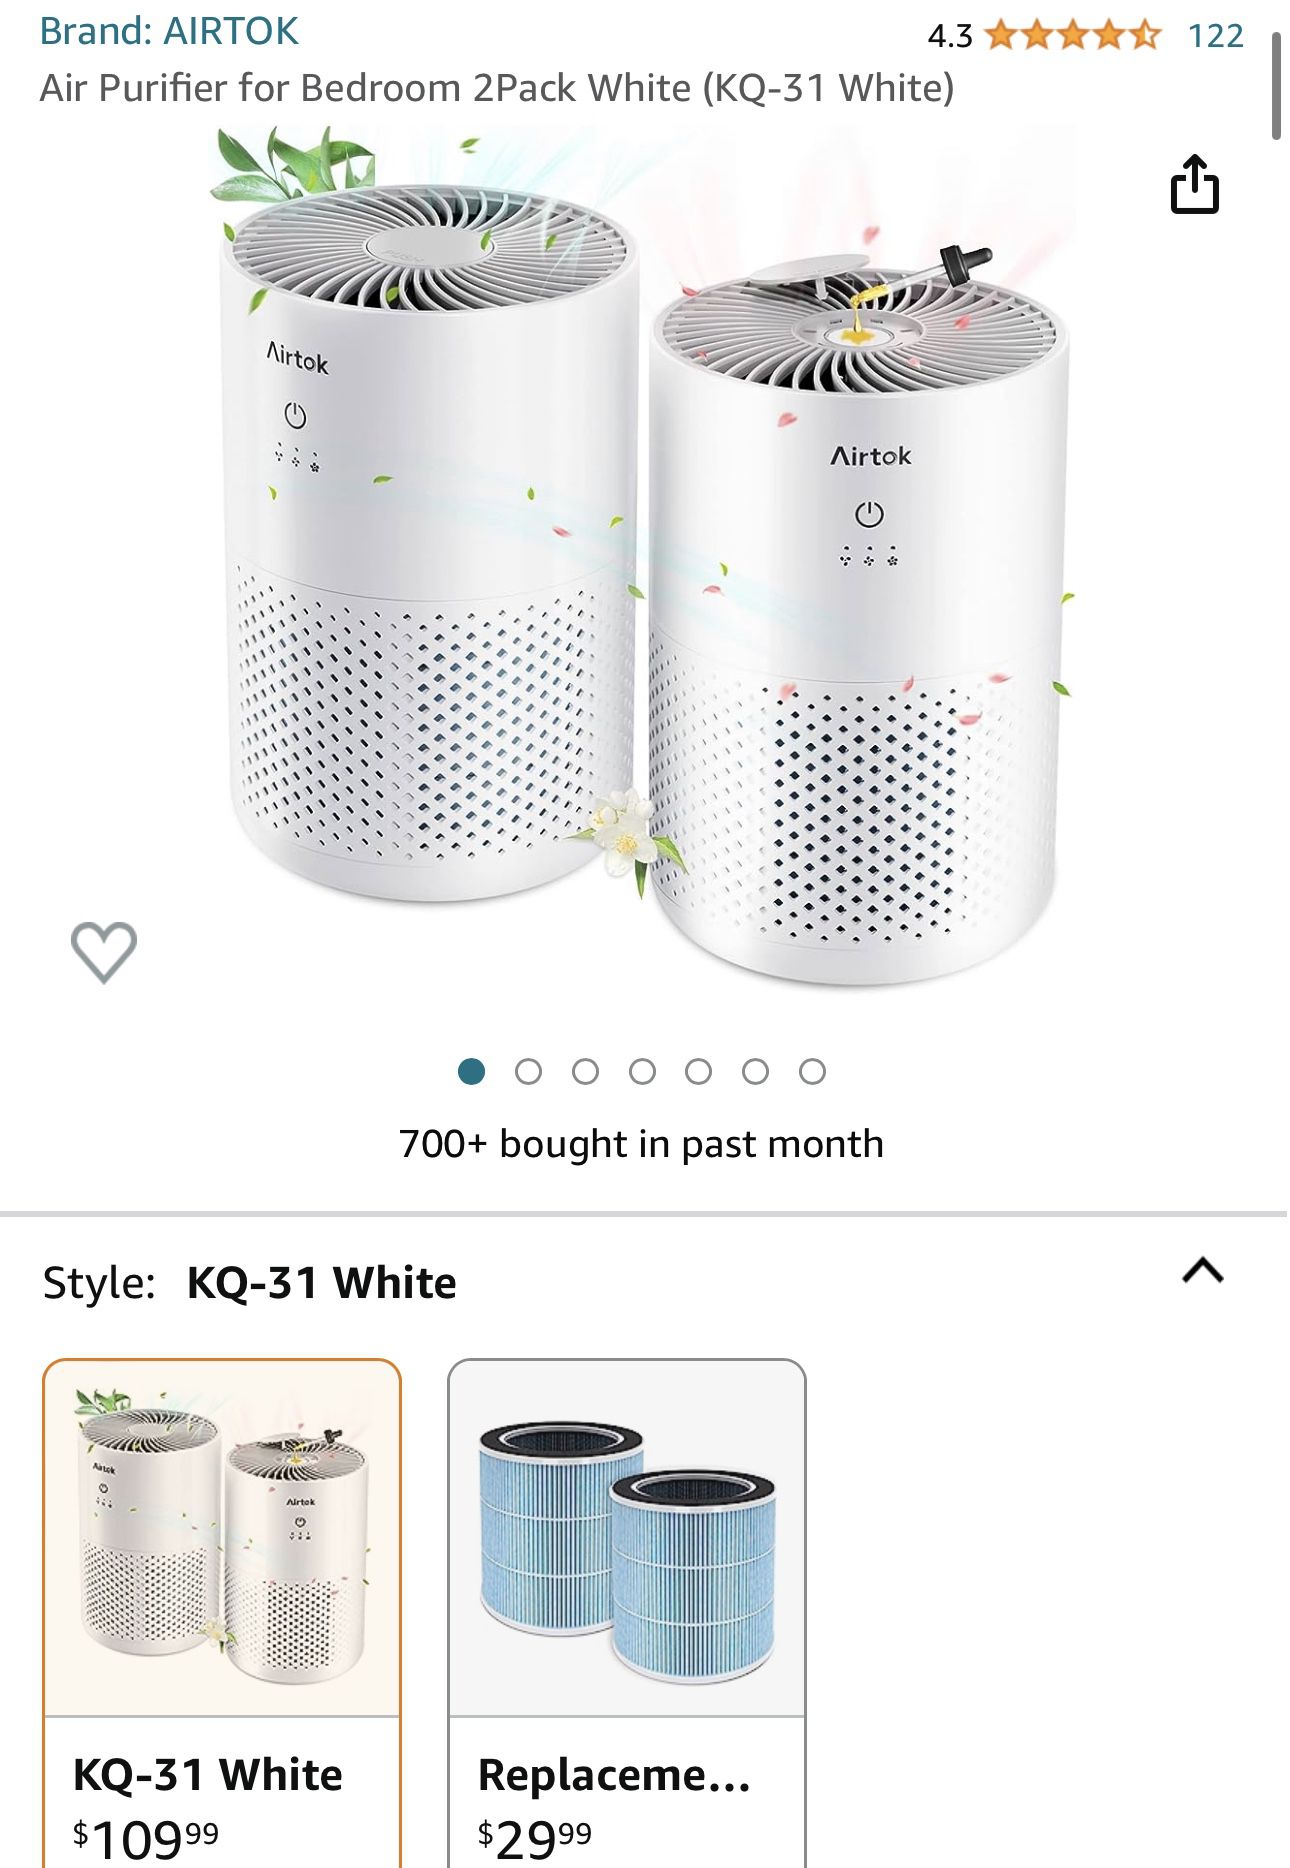 Air Purifier for Bedroom 2Pack White (KQ-31 White) - Comes with 2 filters (Brand New in Box)